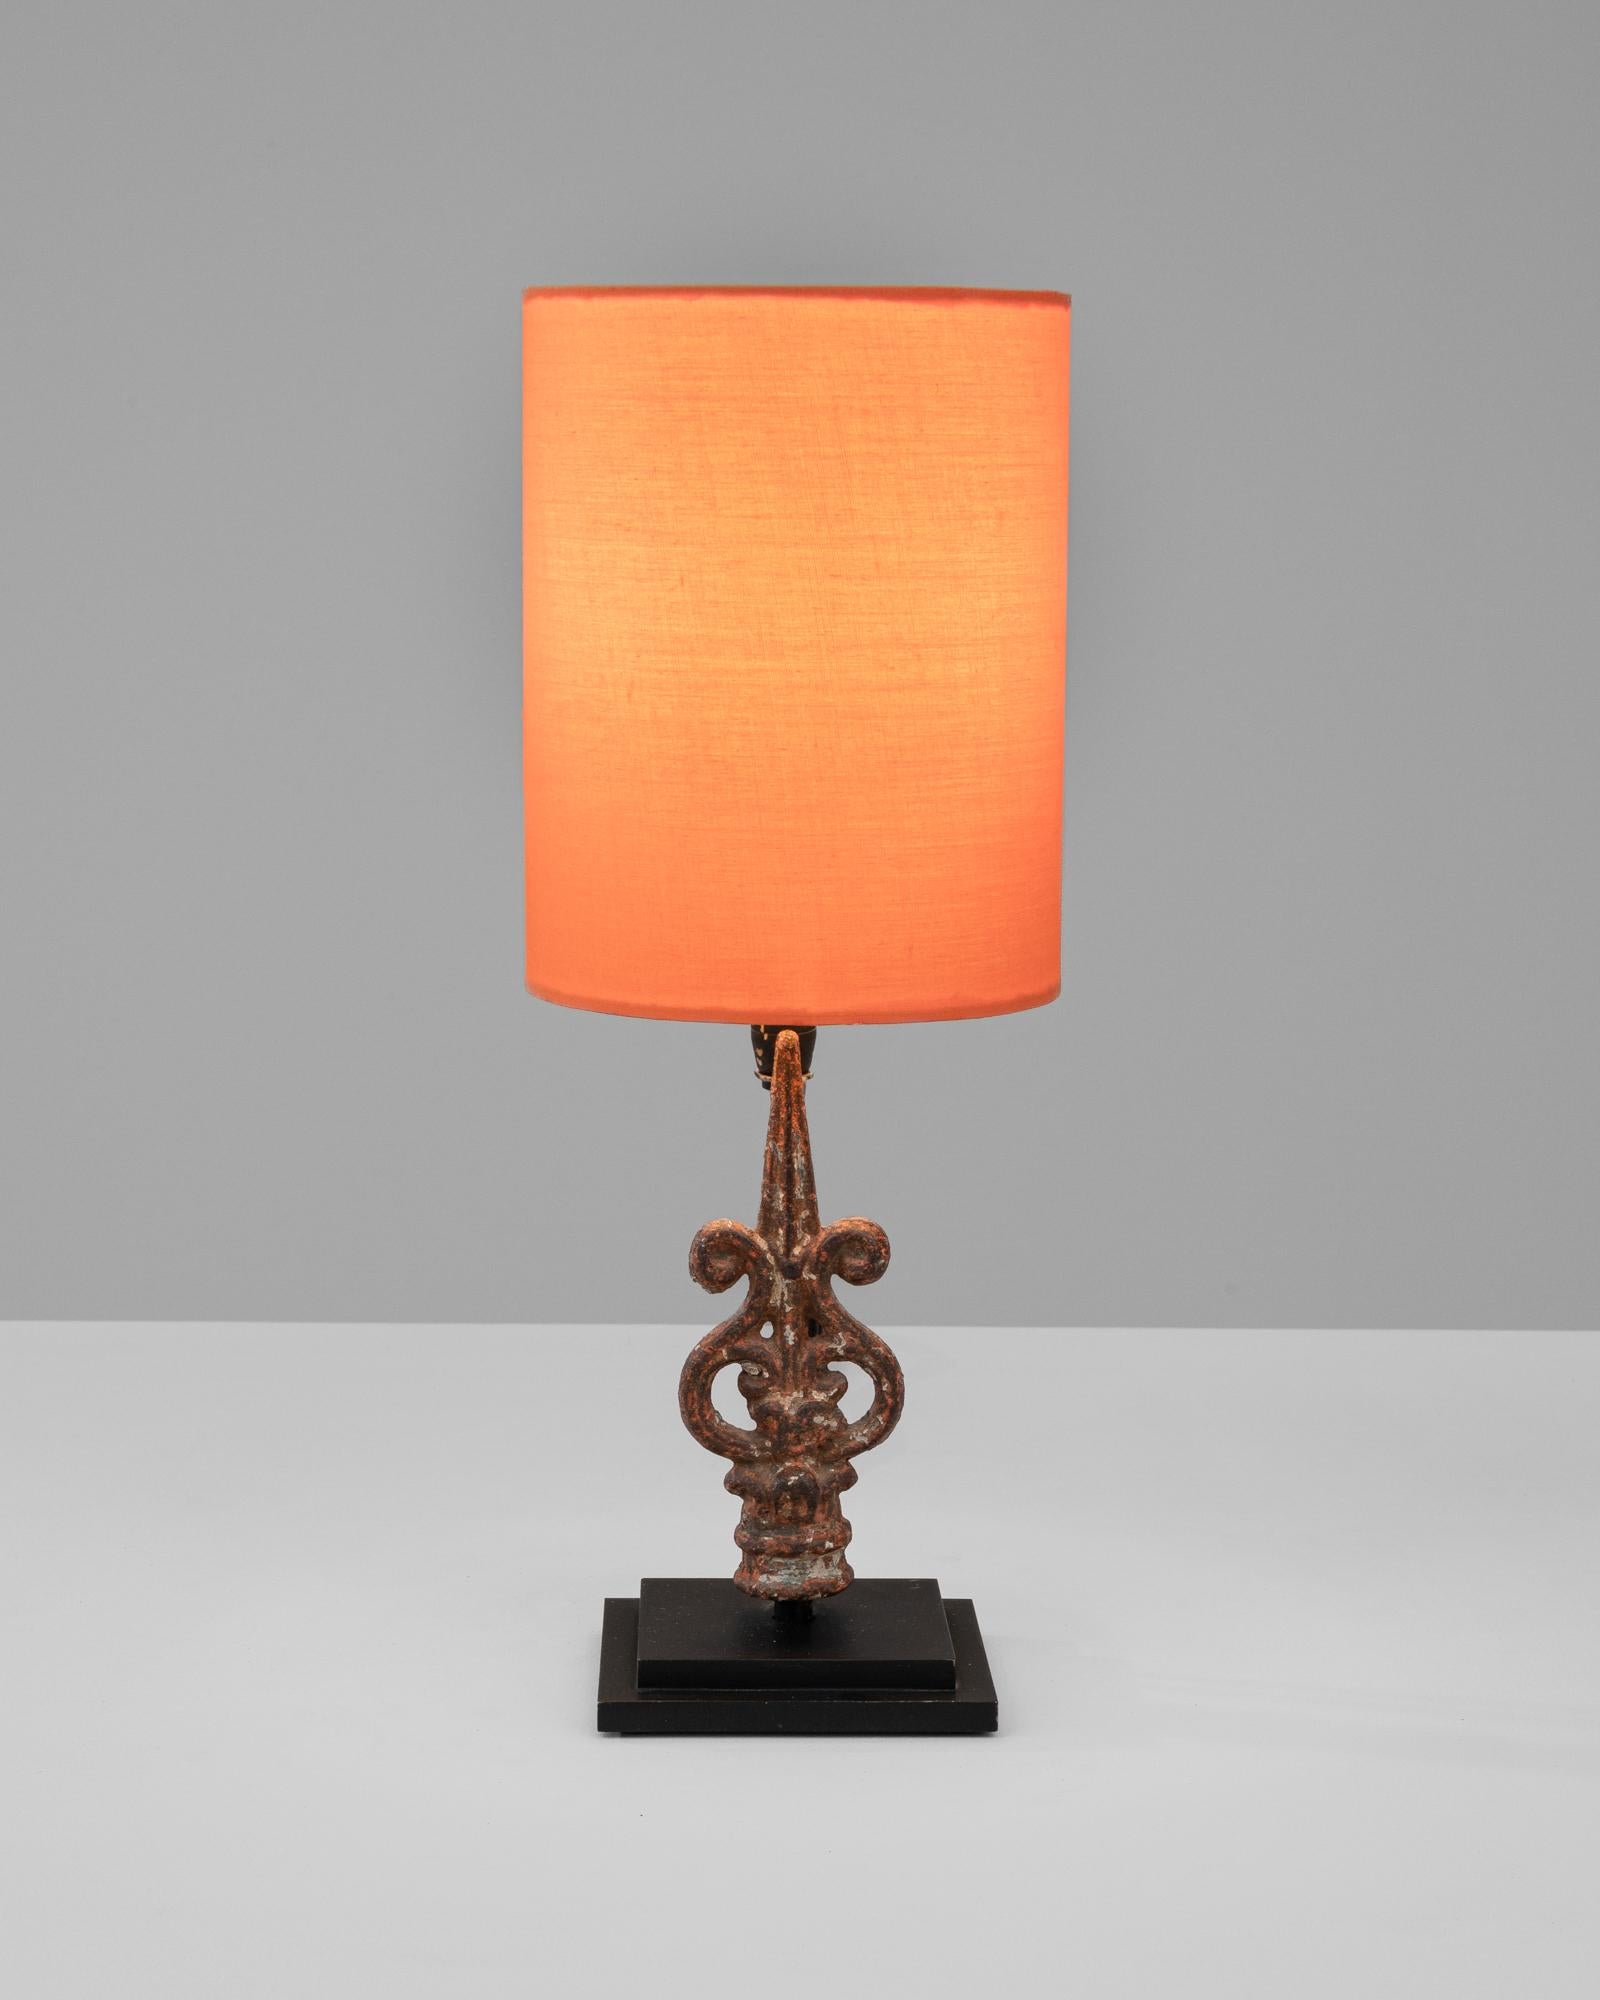 Capture the essence of French design with this 1900s French Wooden Table Lamp, an exquisite piece that artfully blends rustic charm with classic sophistication. The lamp's base is a sculptural work of art, showcasing the intricate curves and